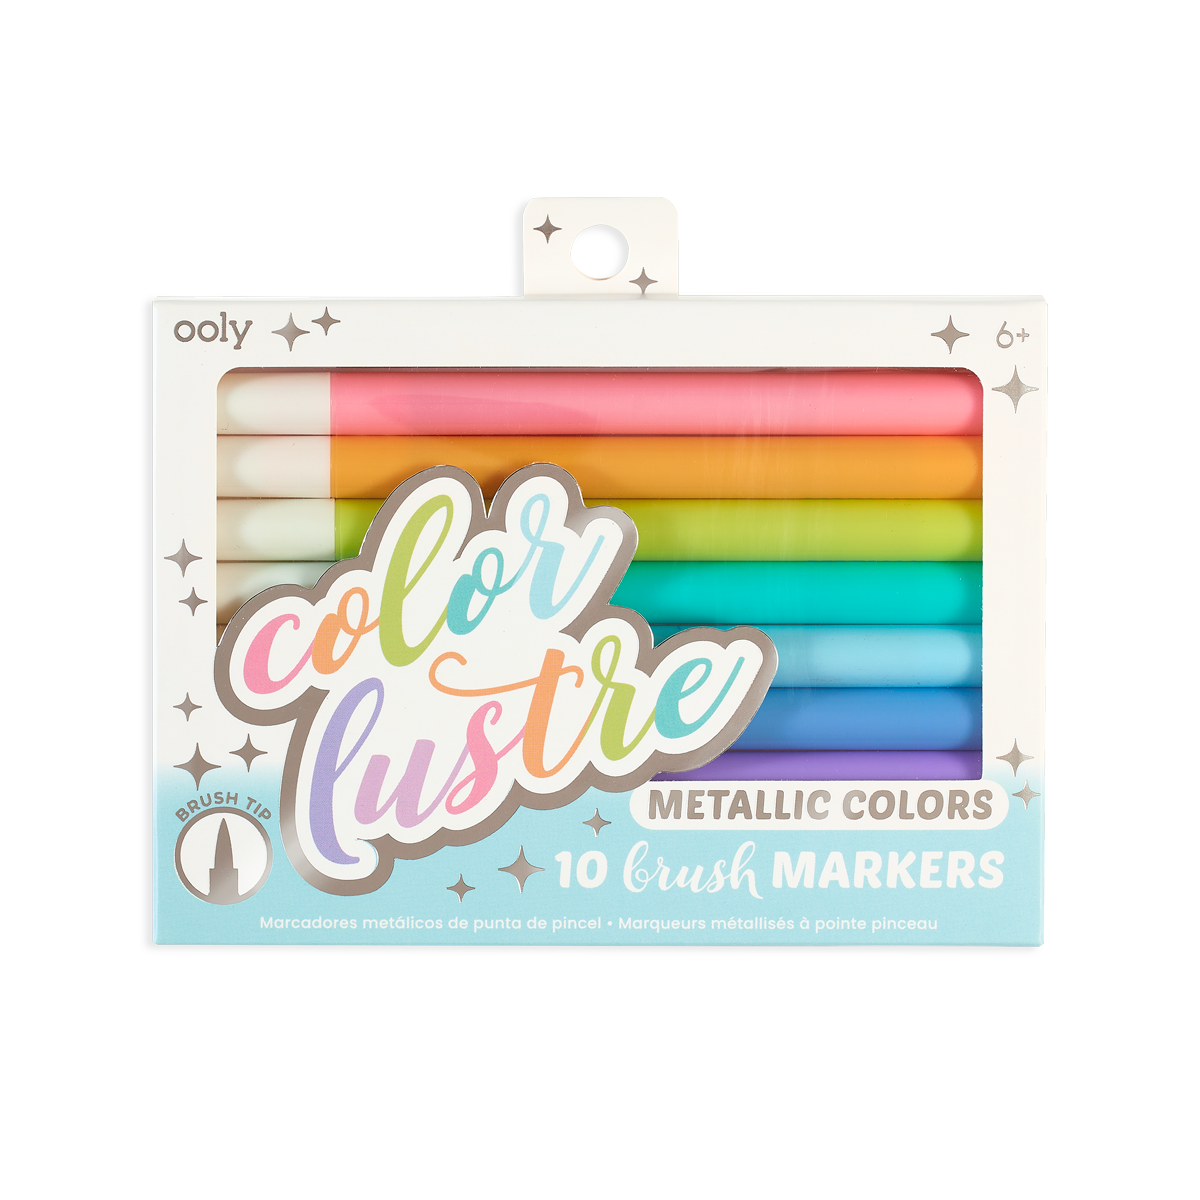 Image of OOLY Color Lustre Metallic Brush Markers in new package